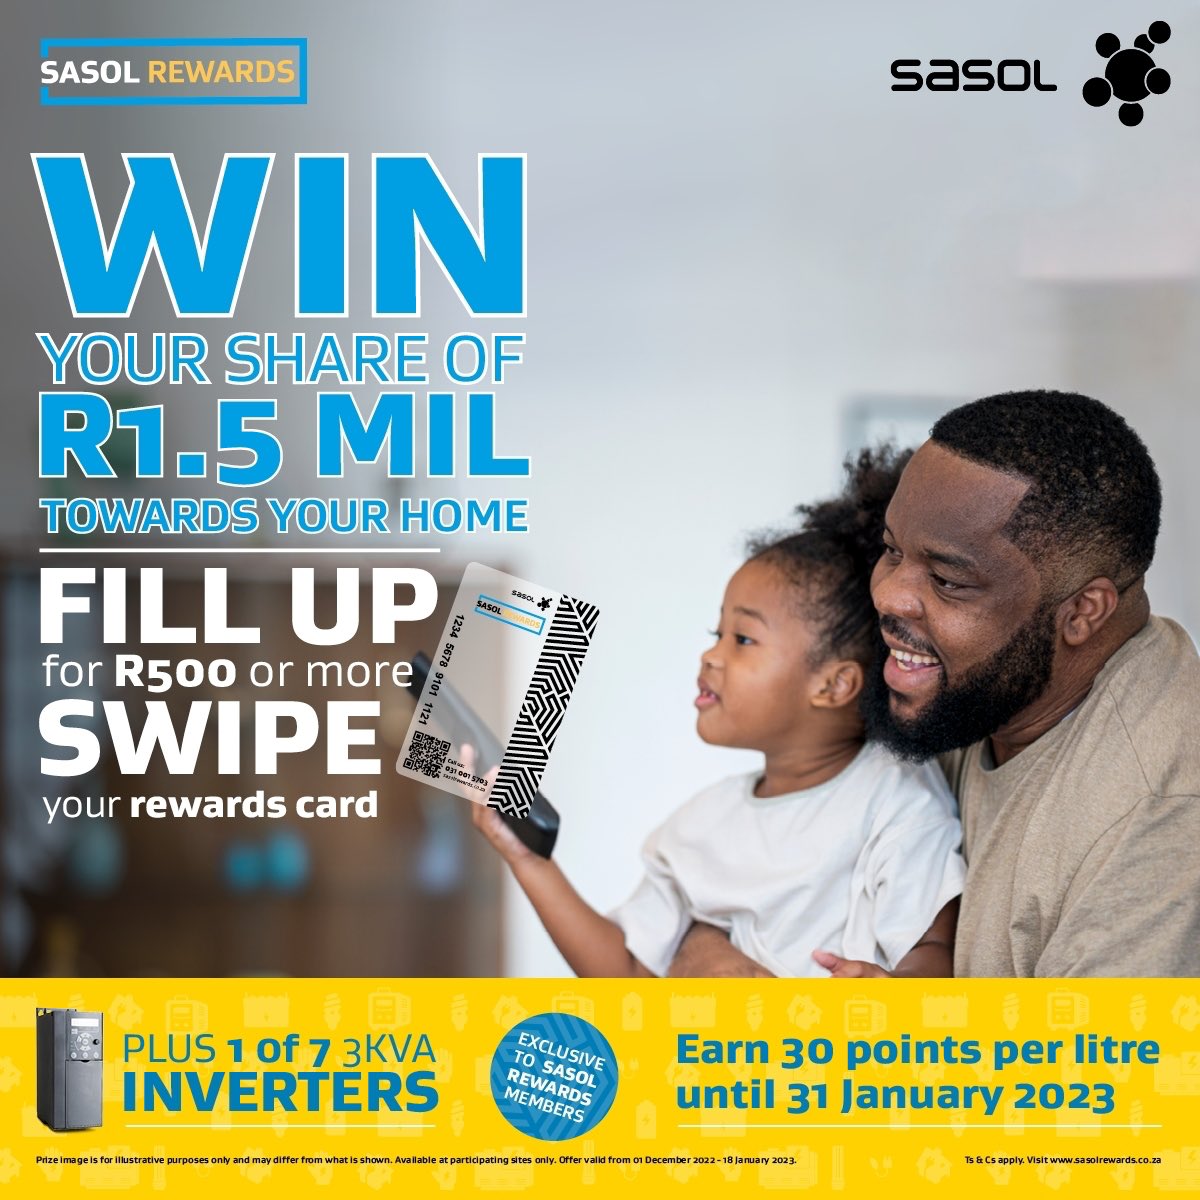 By simply swiping your #SasolRewards card when you fill up with R500 or more, you could win 1 of 7 inverters and say bye bye to loadshedding 😁 or, win a share of 1.5 Milli 💰 towards your home. Visit your nearest Sasol now and swipe 😁 

🔗: bit.ly/3hOrj2f